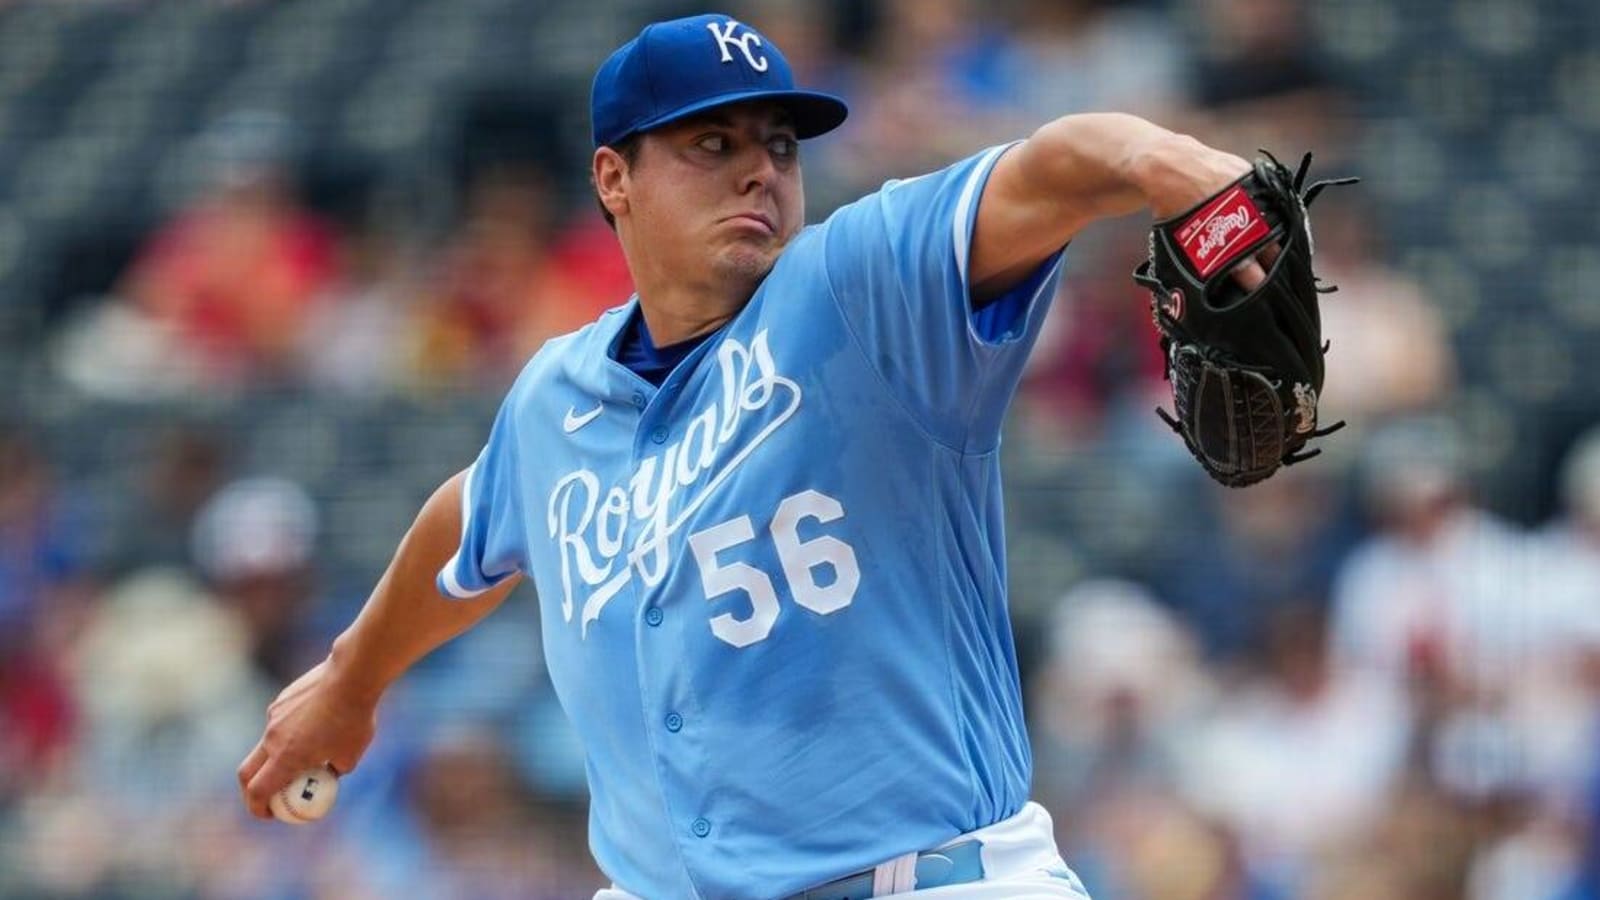 Kansas City Royals vs. Chicago White Sox prediction and odds Tue., 8/2: KC goes for series win